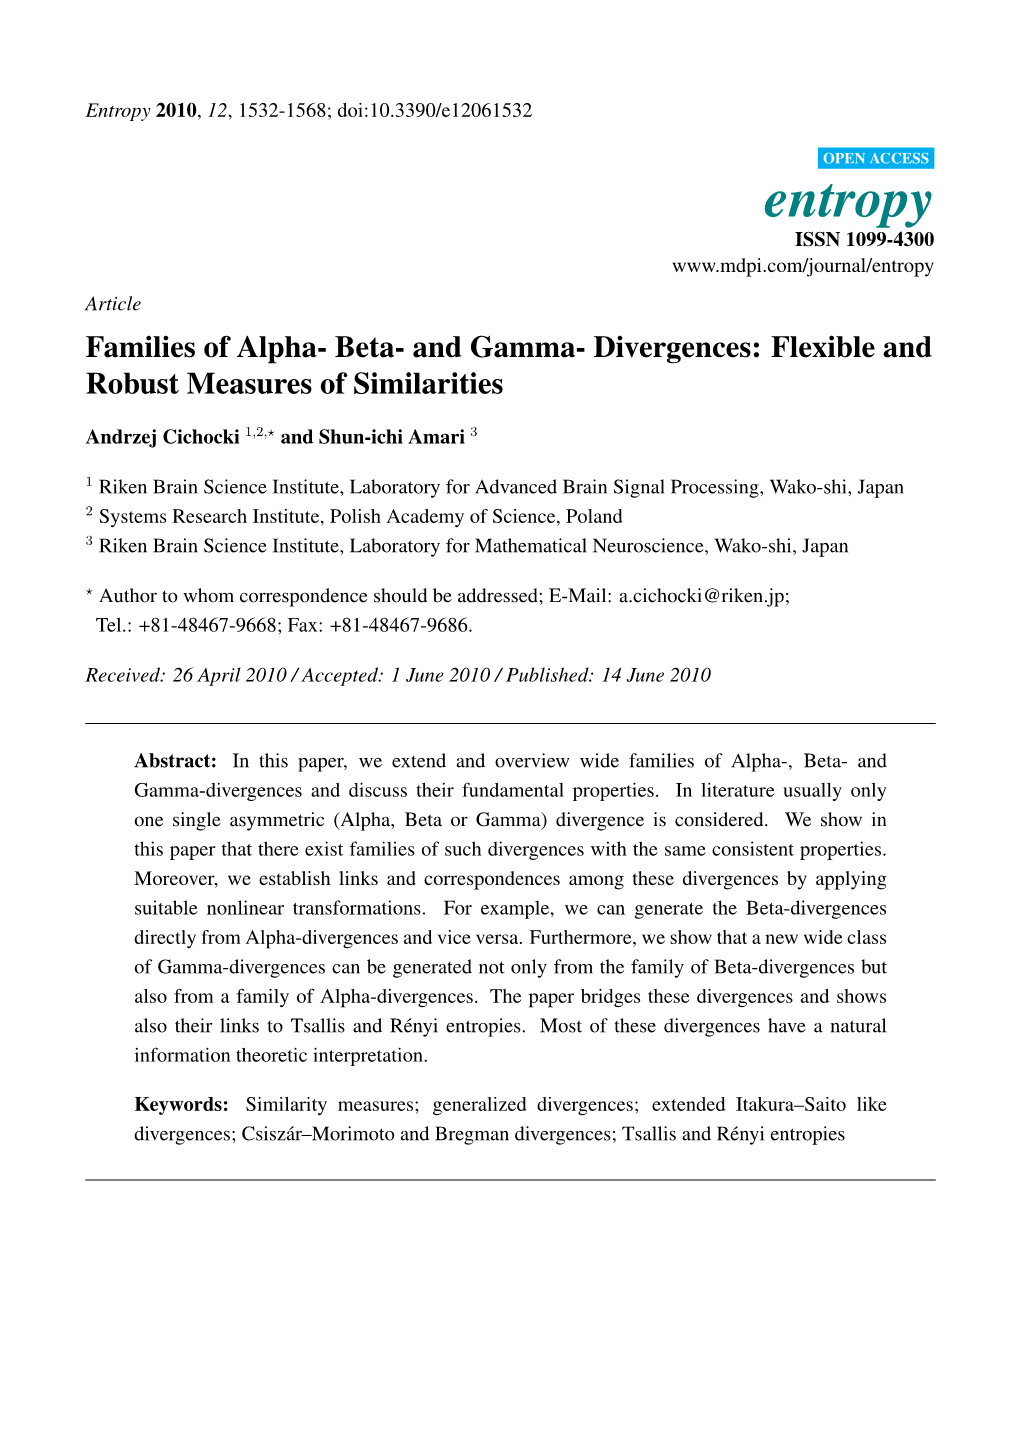 Families of Alpha- Beta- and Gamma- Divergences: Flexible and Robust Measures of Similarities